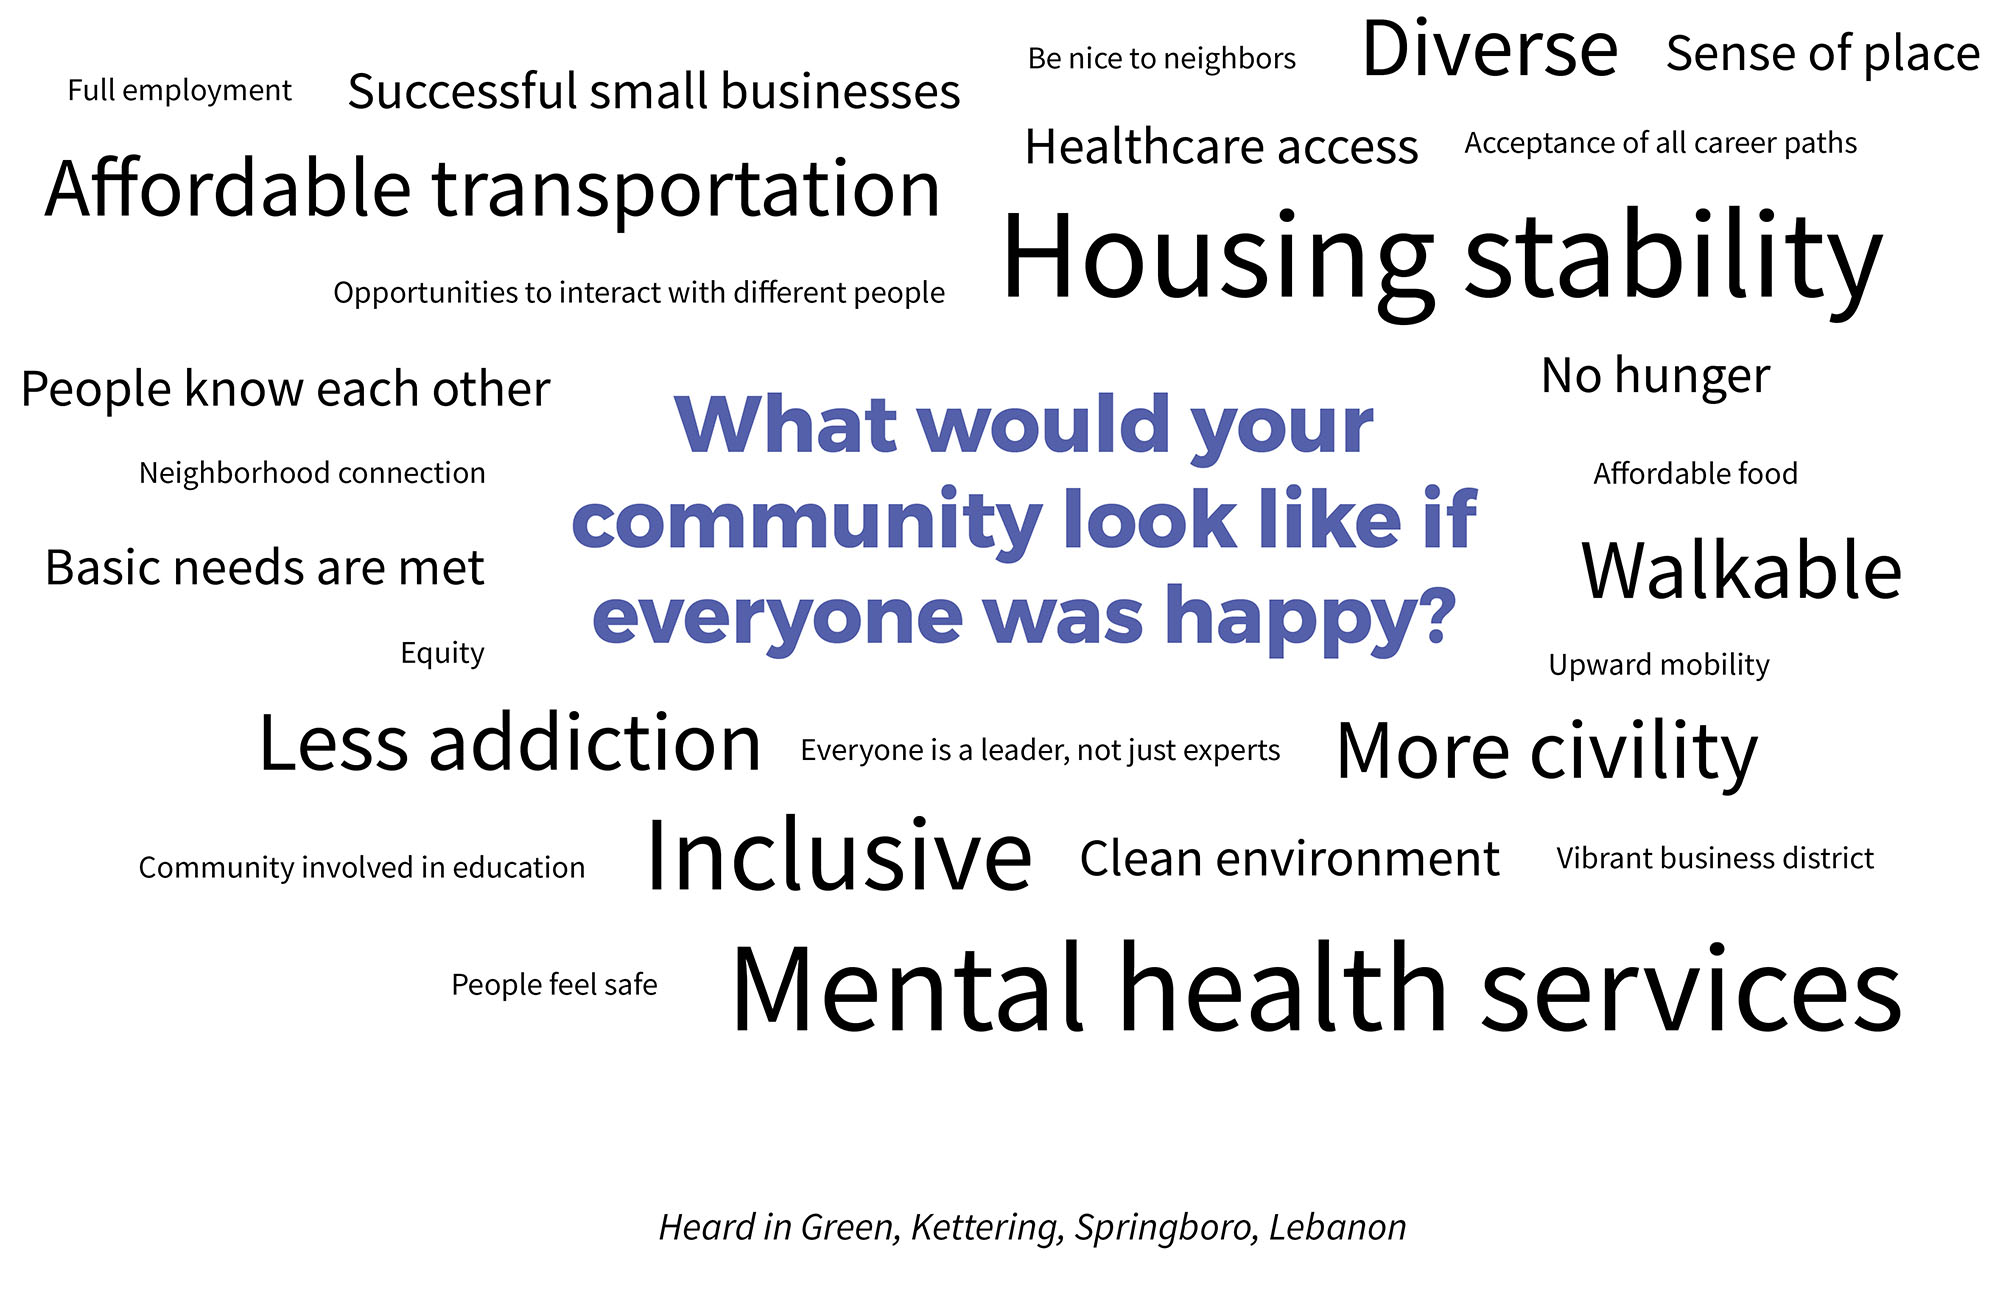 Word cloud with text describing what the higher income communities would like if everyone was happy.